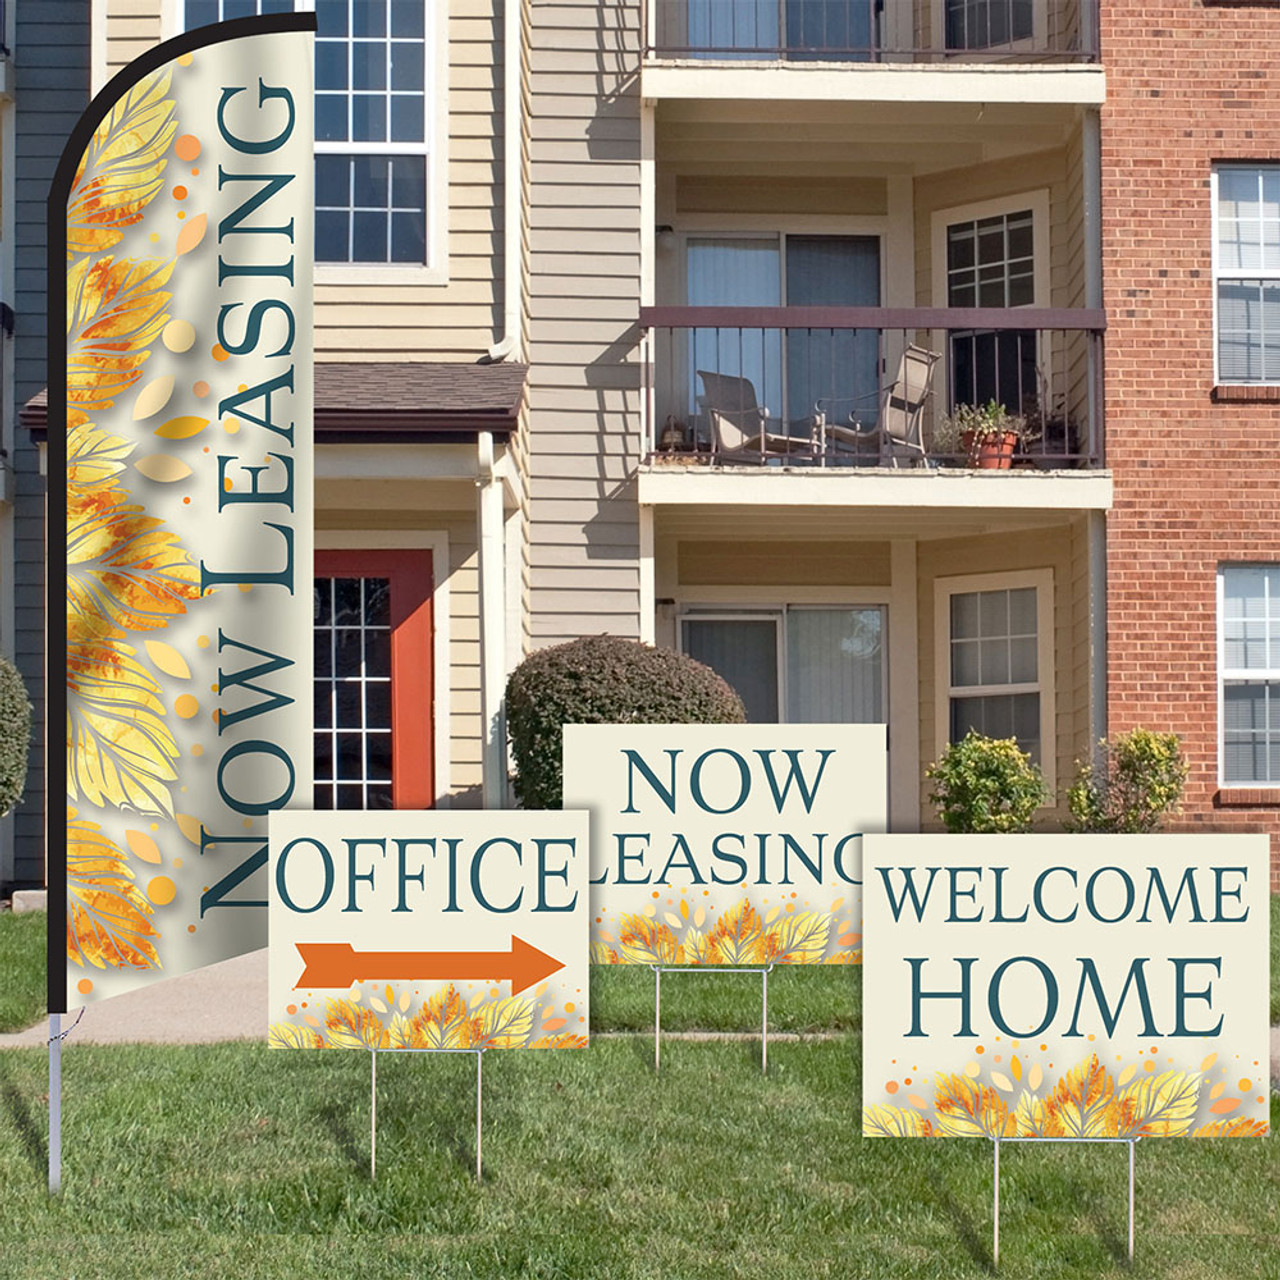 Autumn Gold - Double Sided Feather Flag and Yard Sign Marketing Bundle